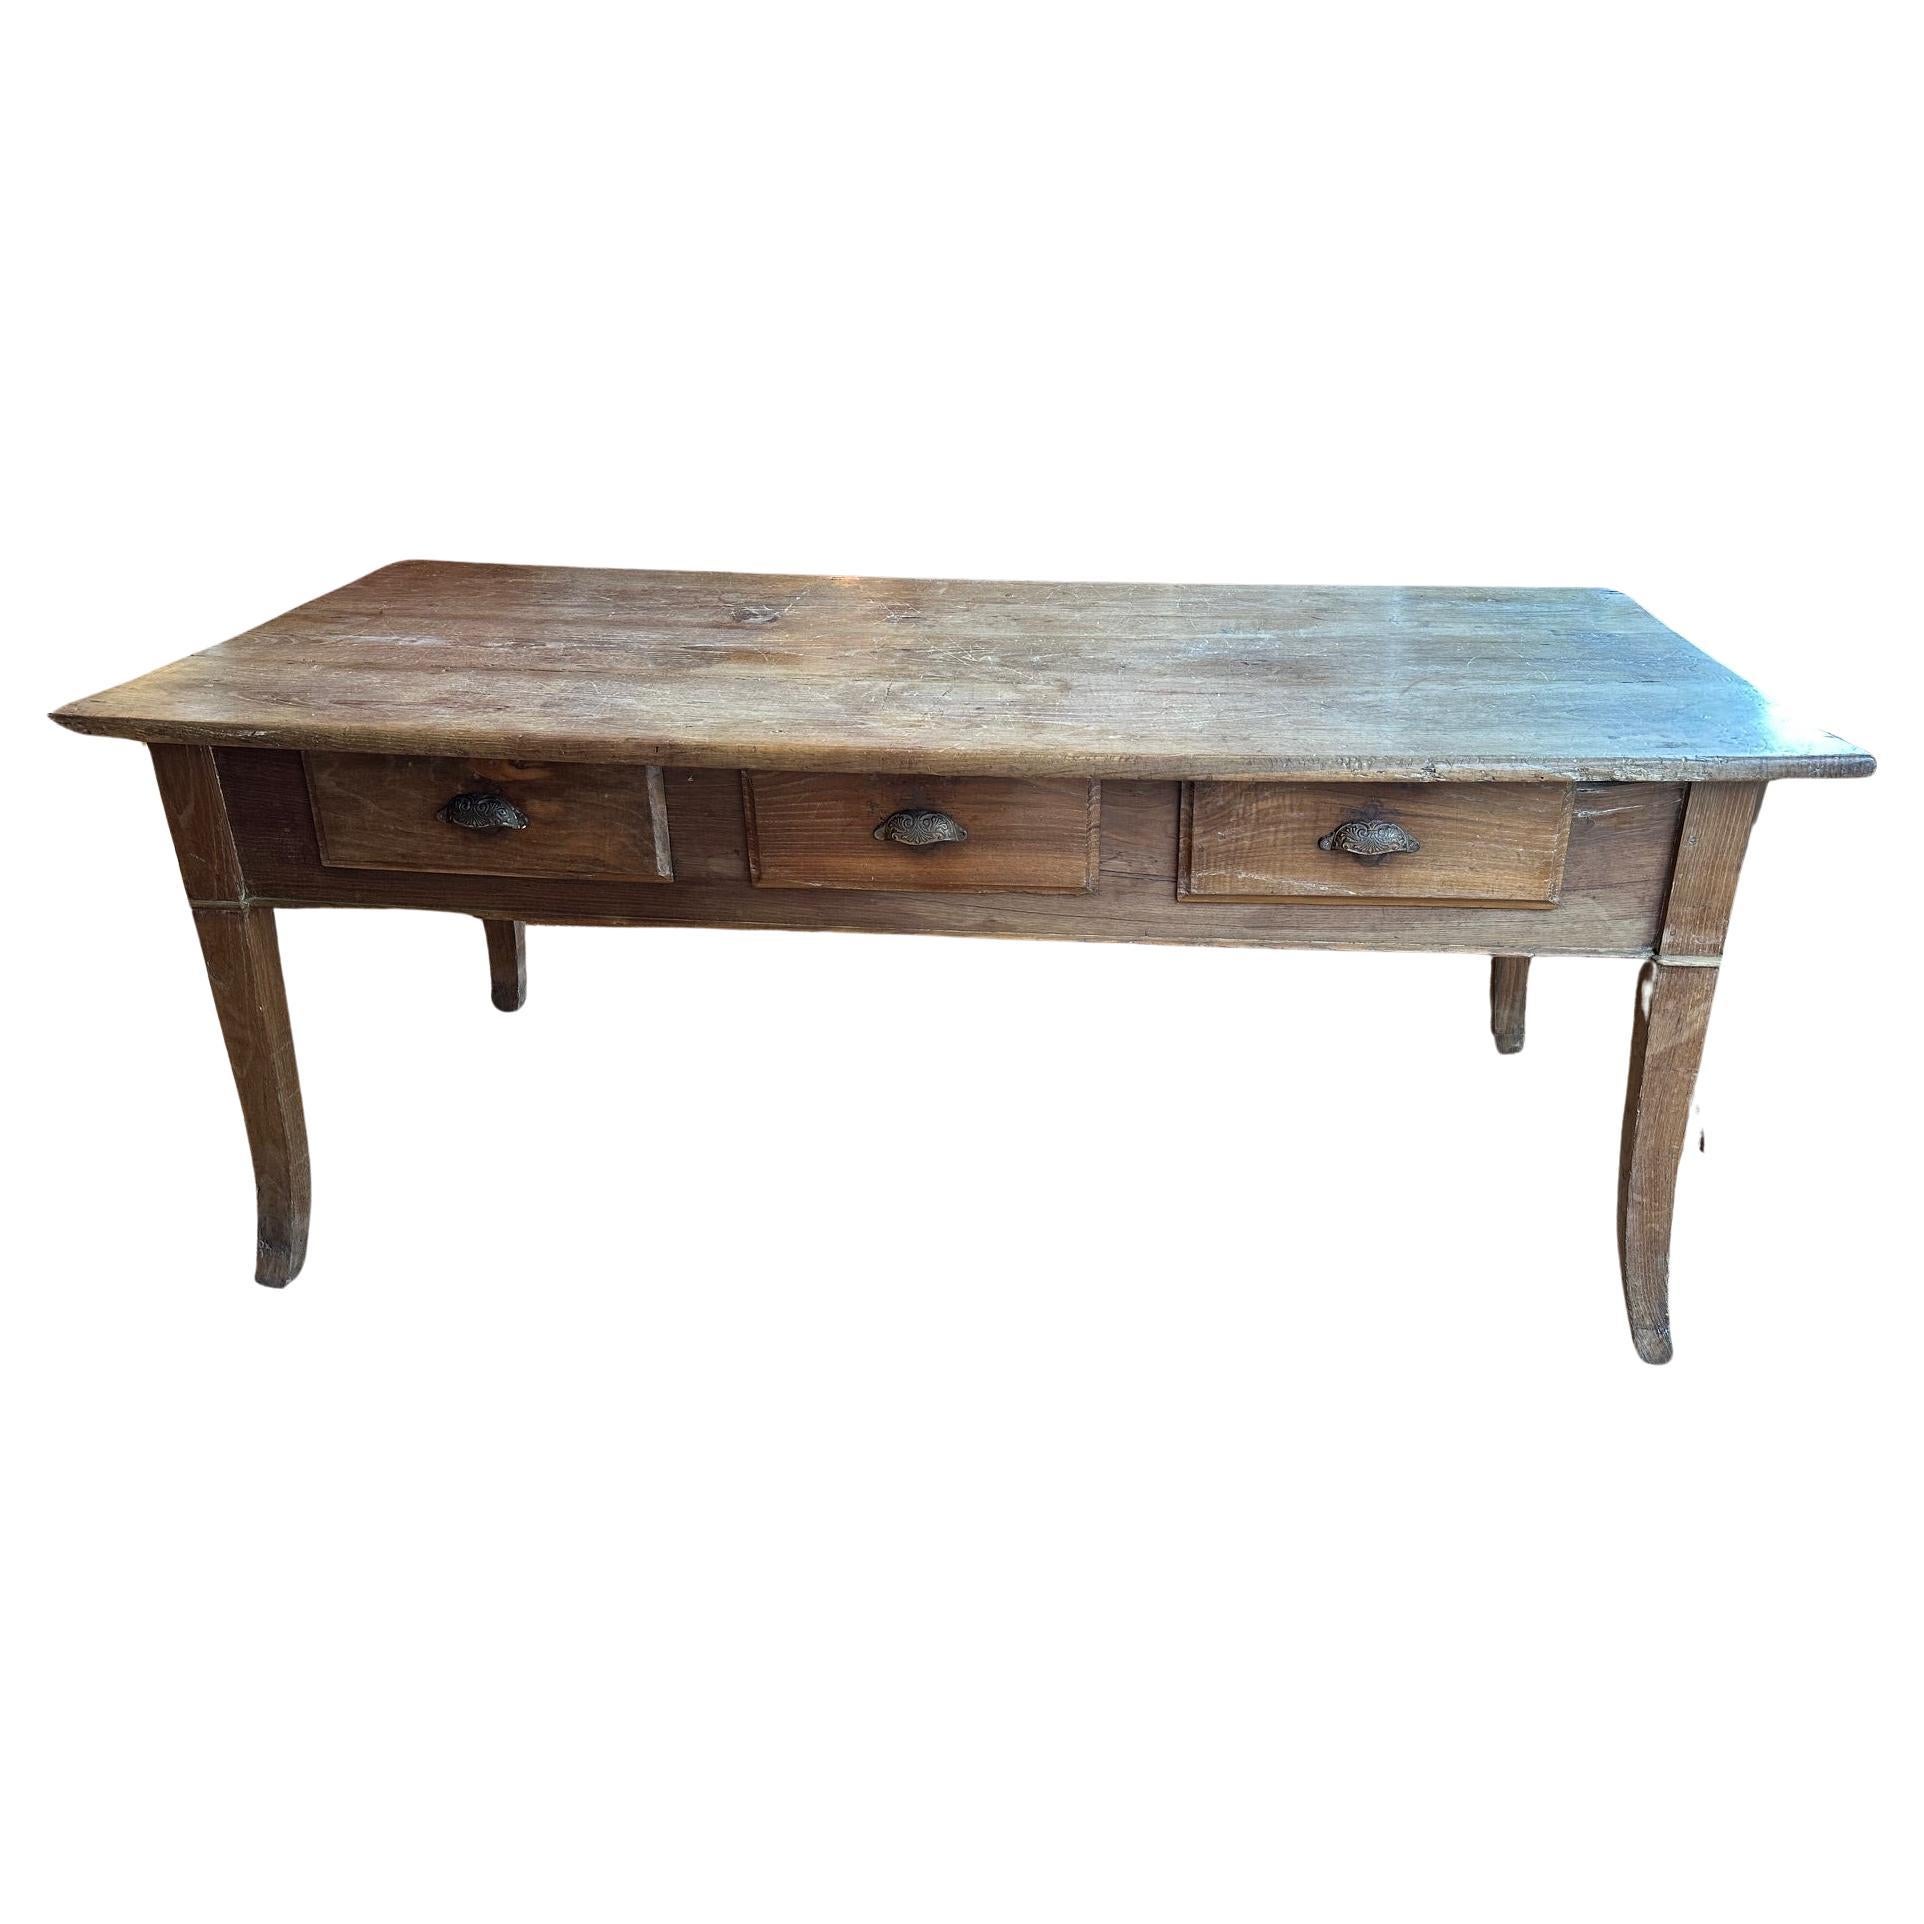 French Chestnut country table with three drawers